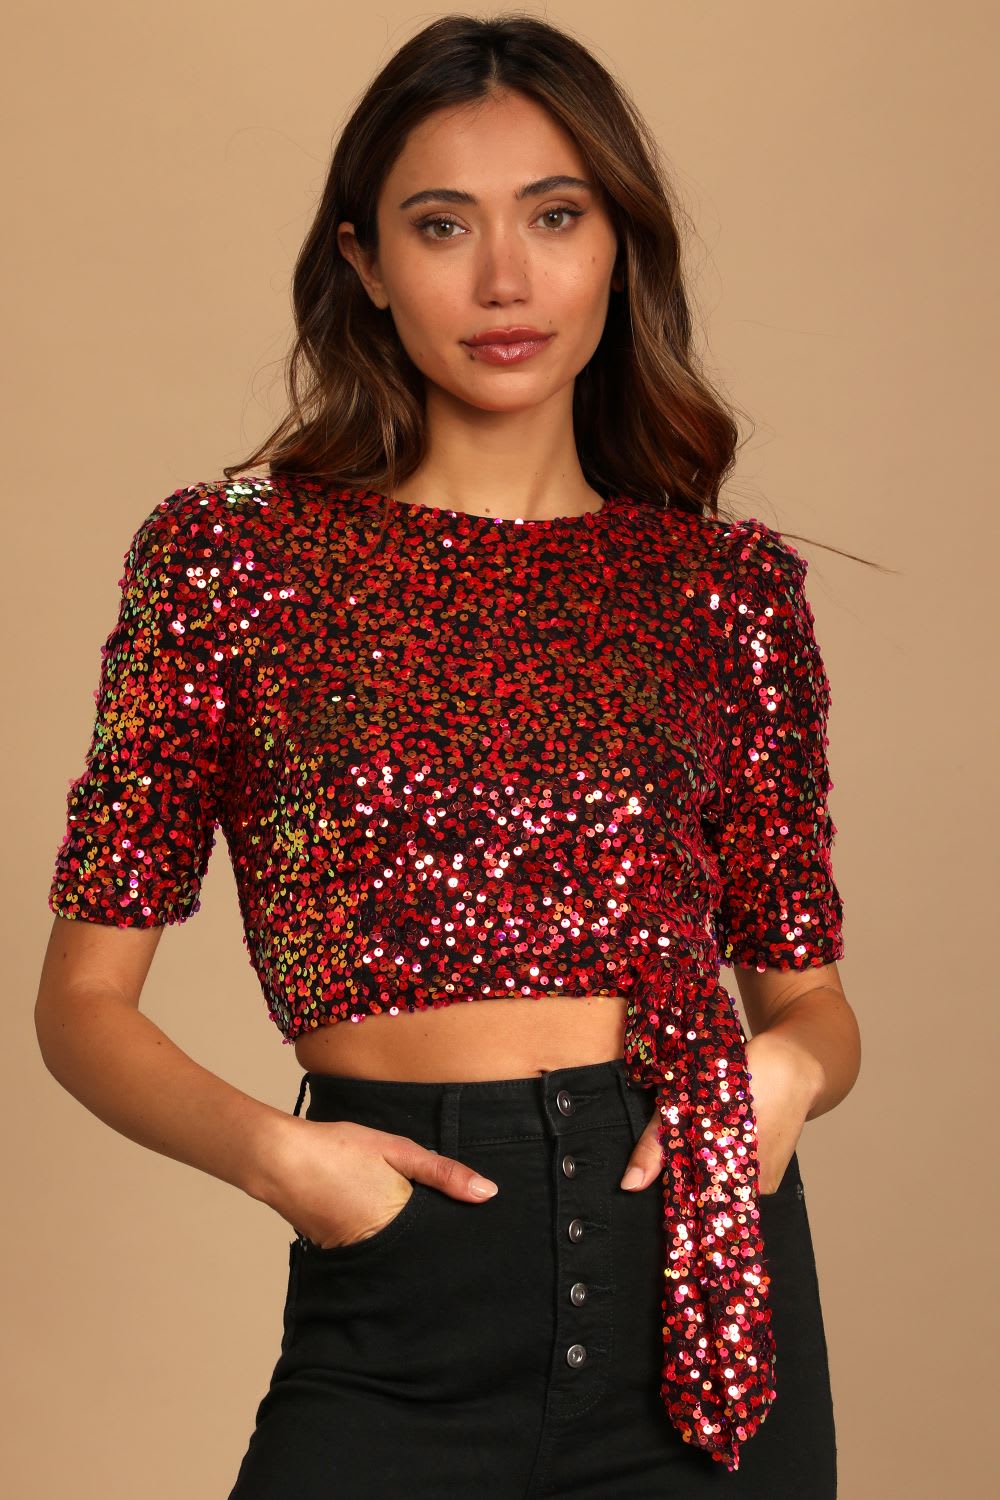 Dressy Holiday Tops: Gorgeous Party Tops For 2023 - Lulus.com Fashion Blog